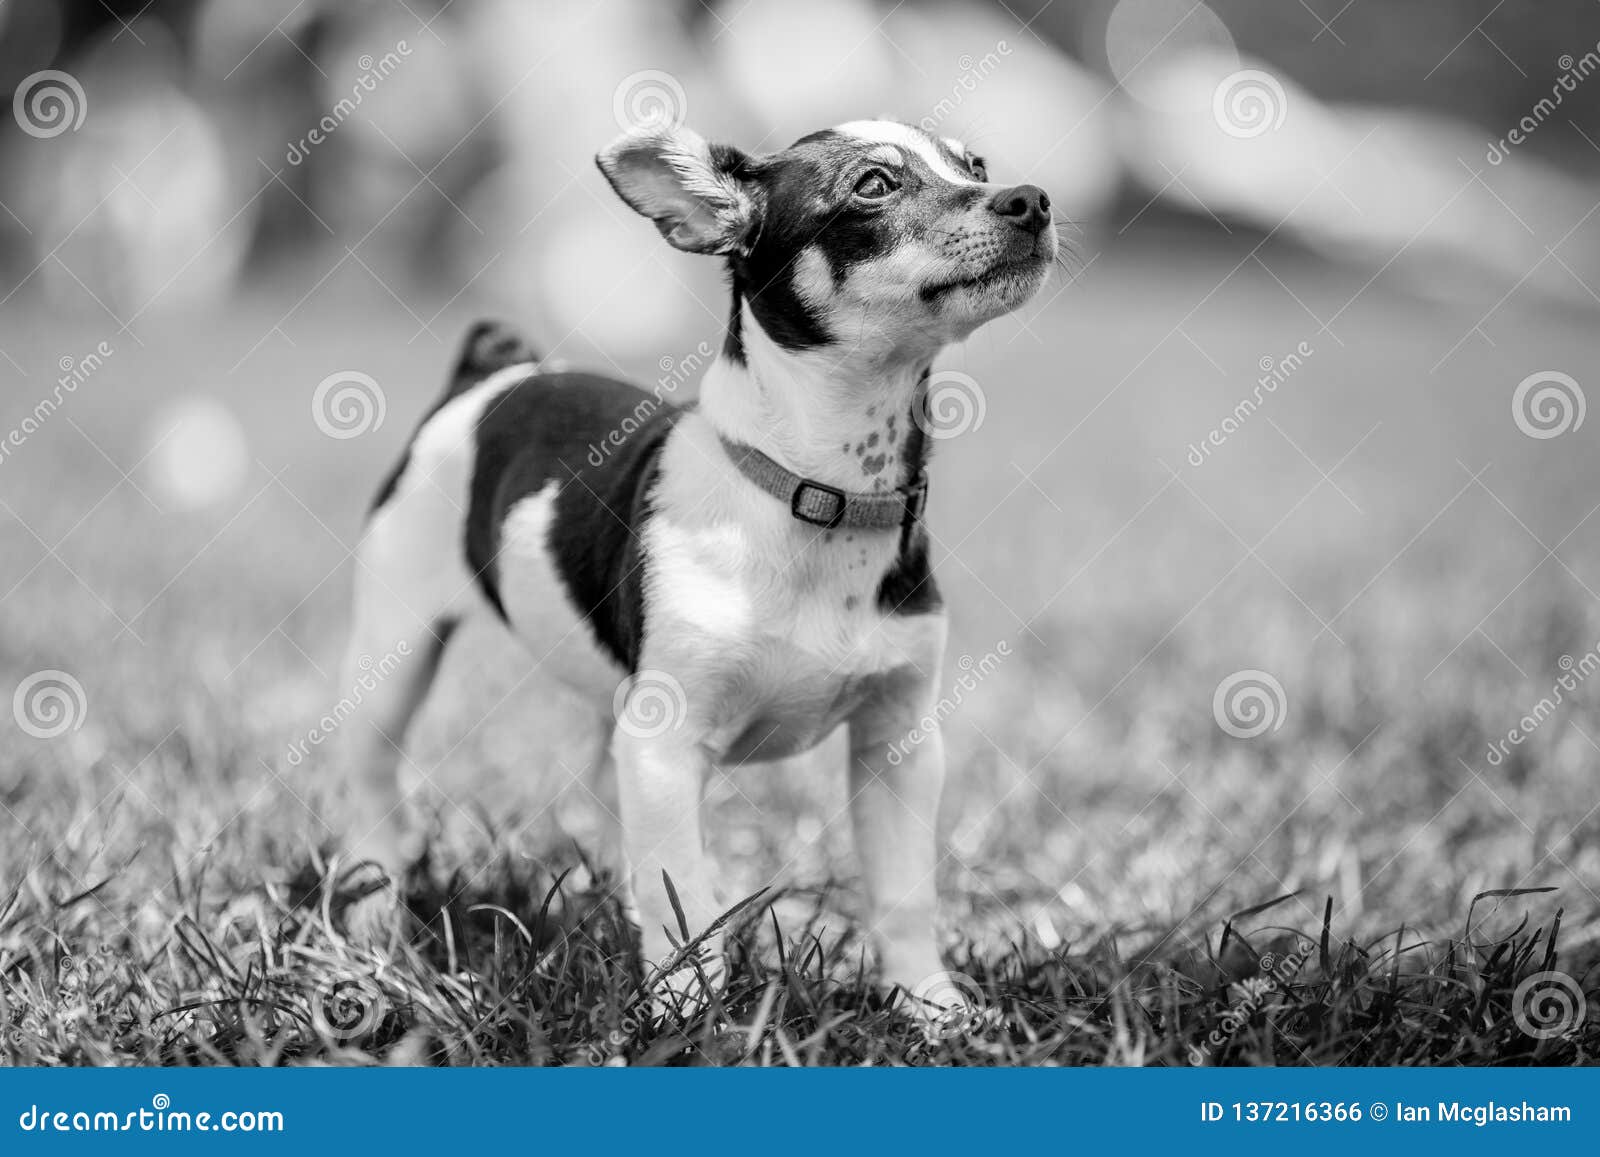 black and white jack russell boston terrier